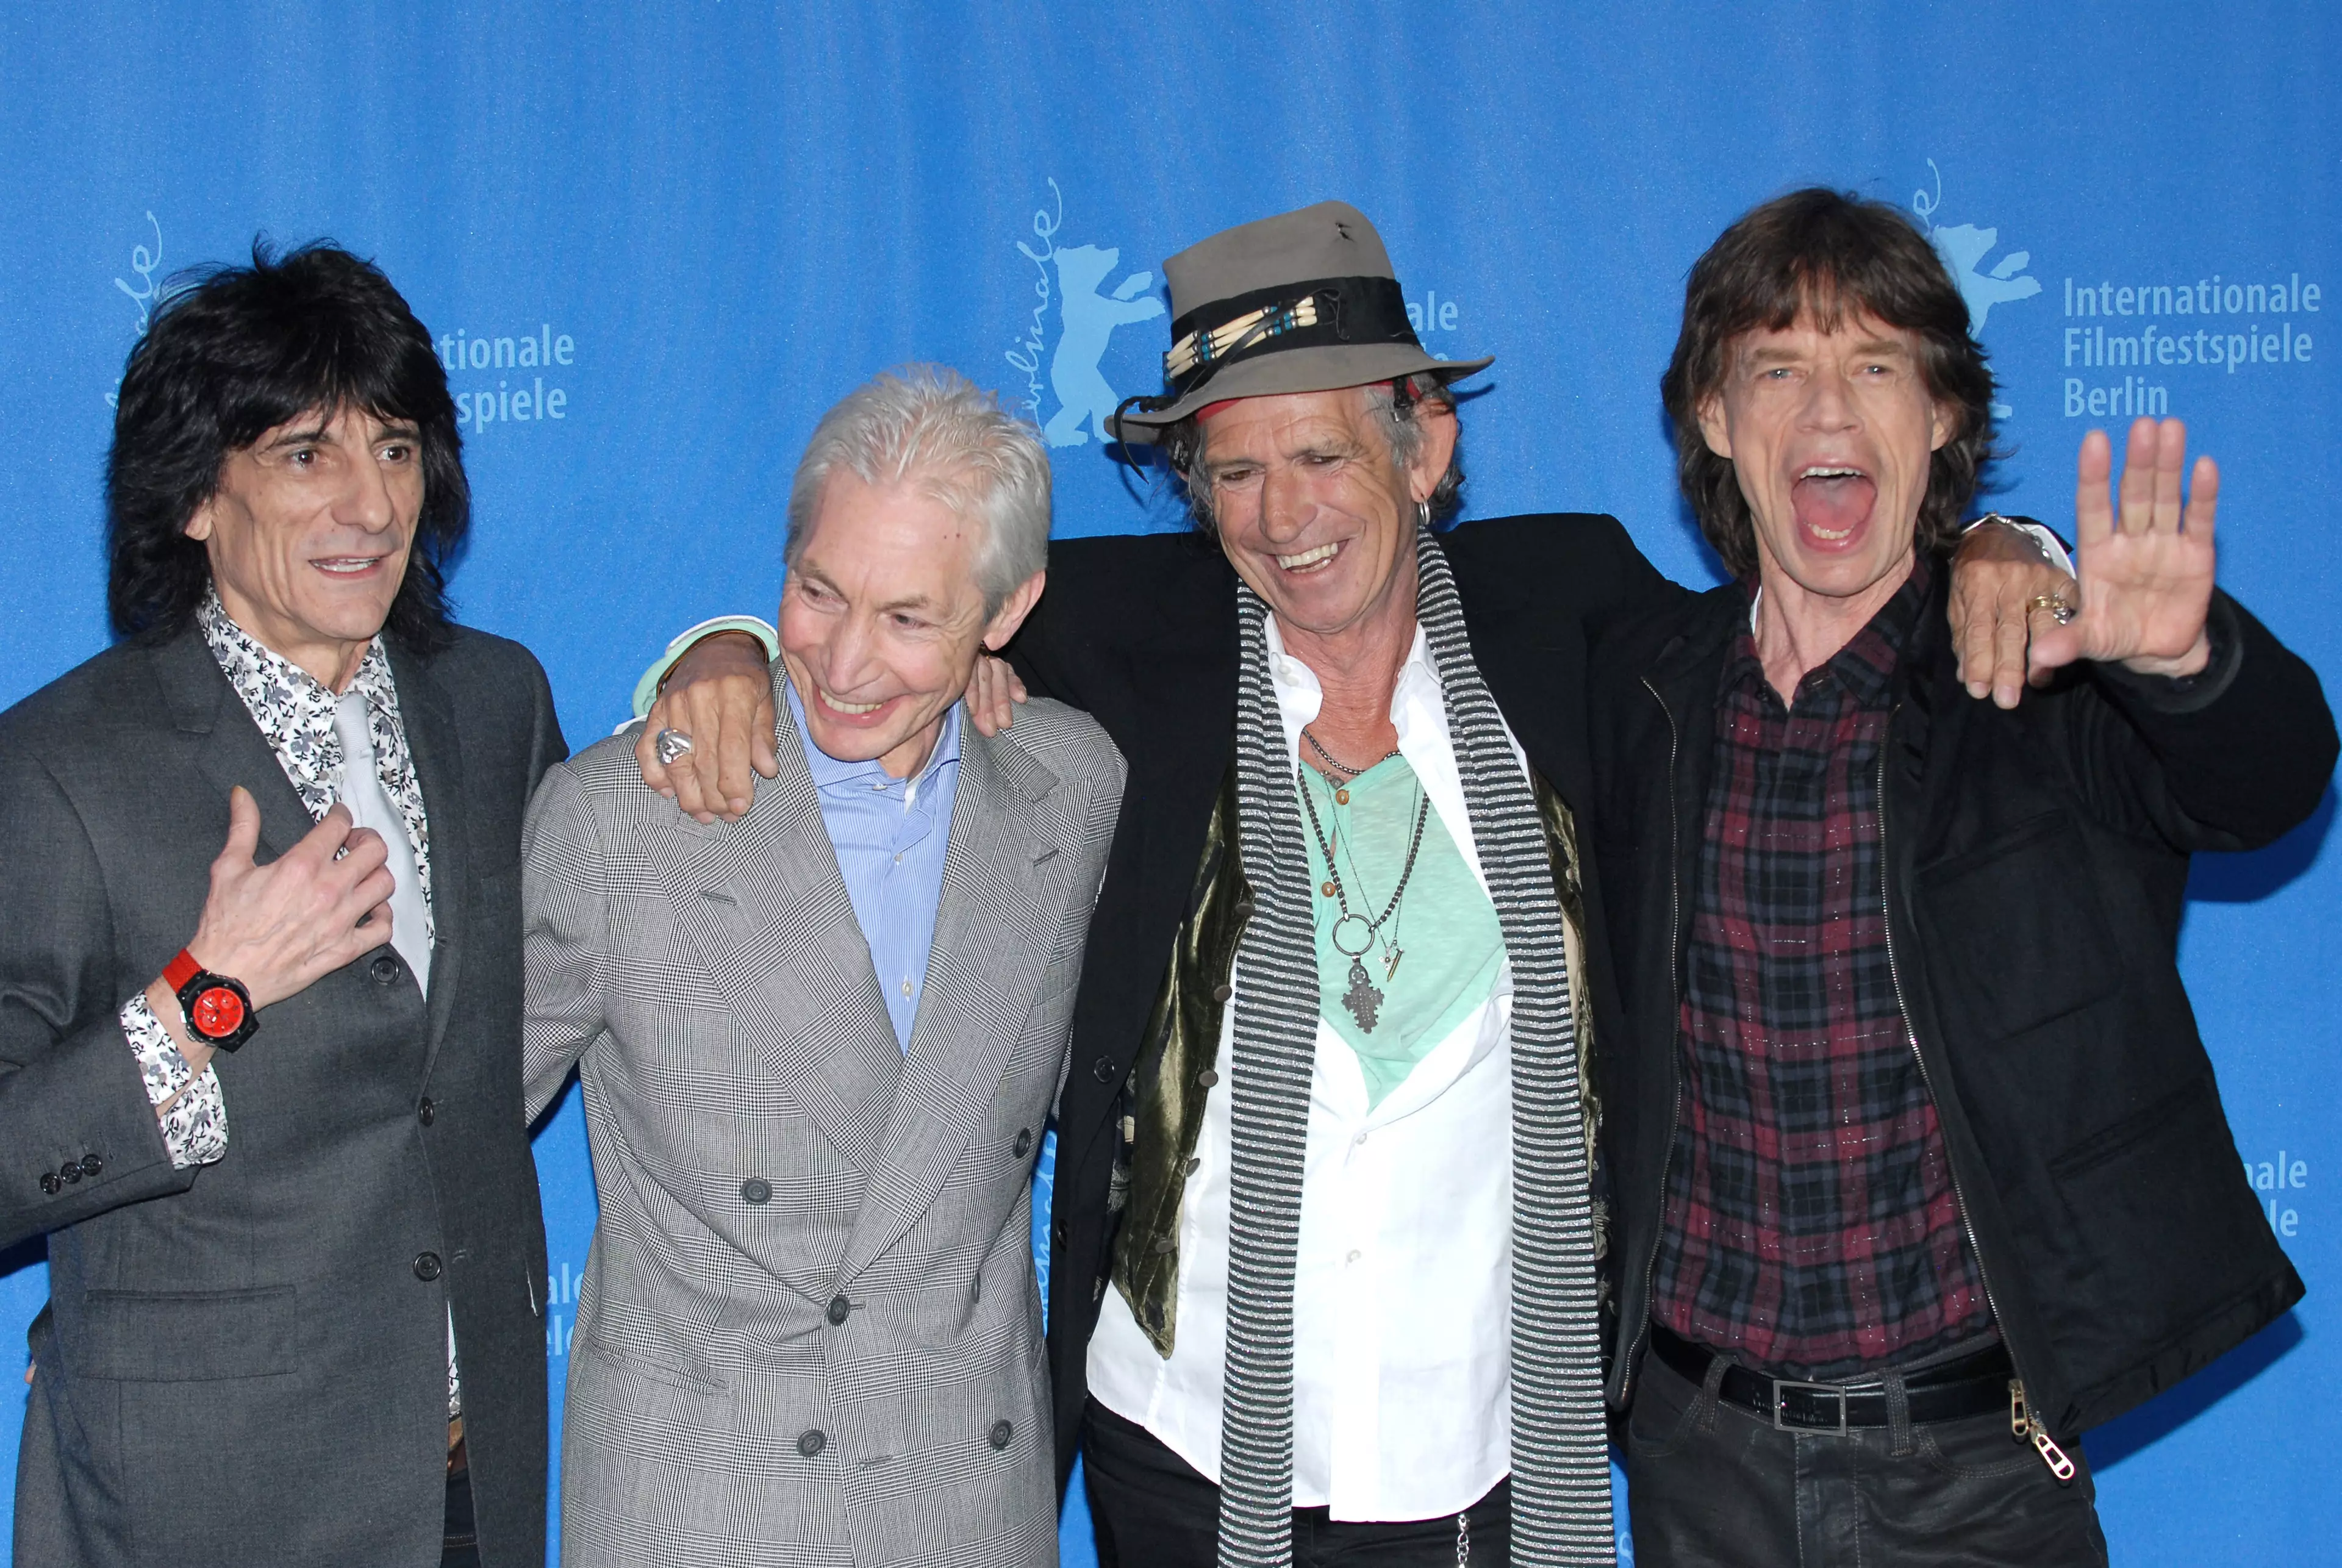 February 2008 photo of Rolling Stones members Mick Jagger, Keith Richards, Ron Wood and Charlie Watts. (